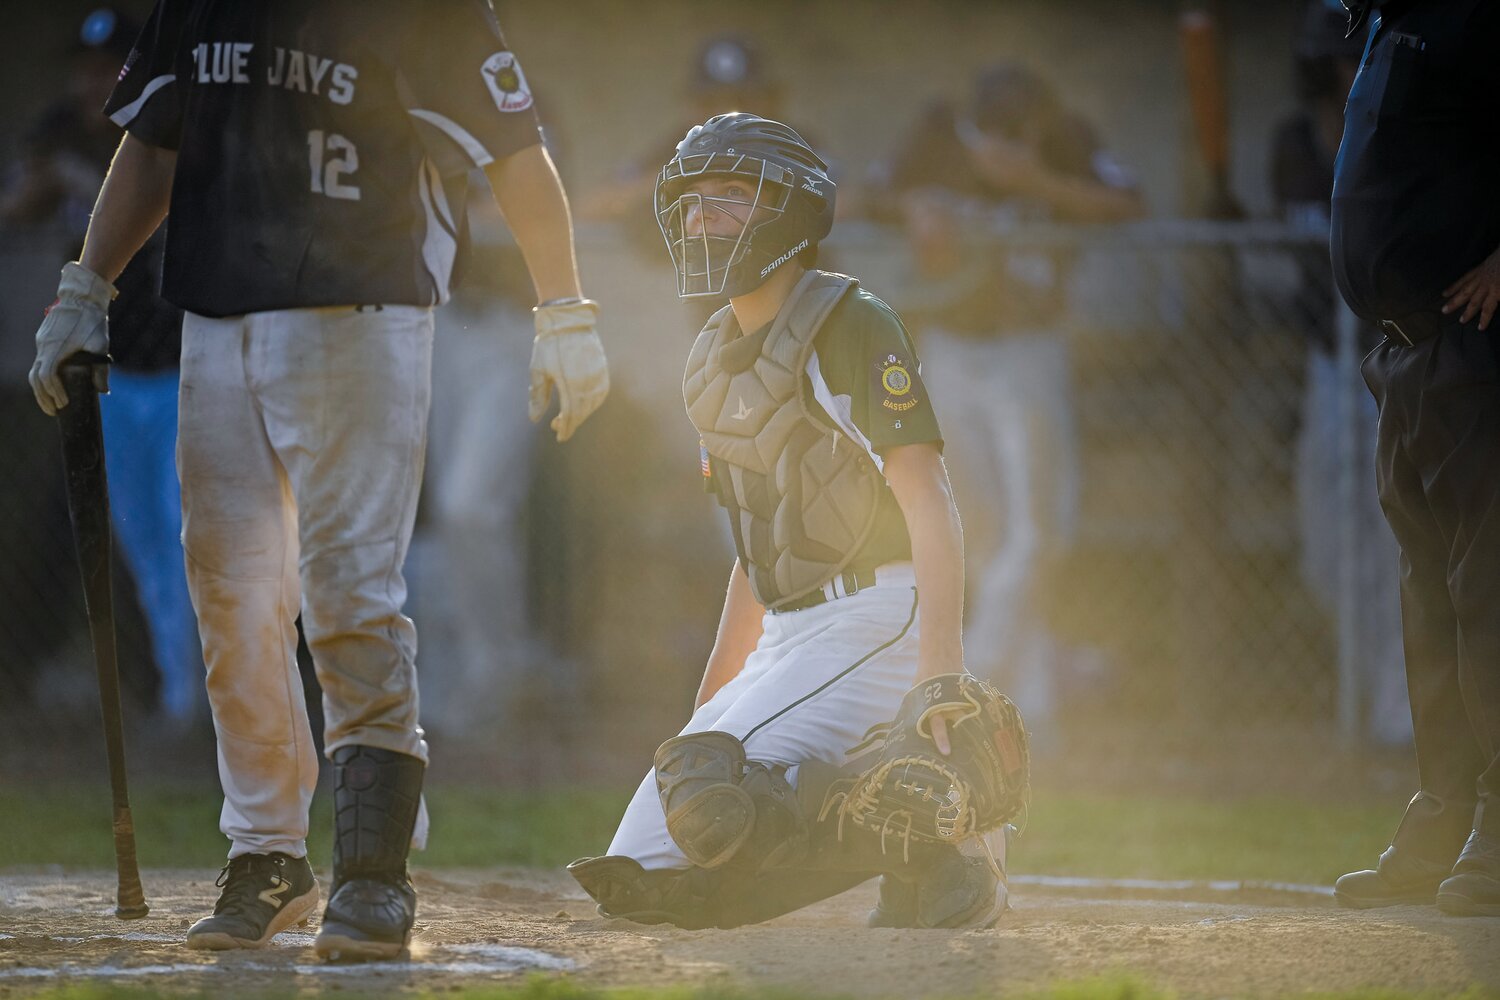 Pennridge catcher Joe Santora during the first inning’s fading sunlight, before storms stopped the game in the third inning for 30 minutes.